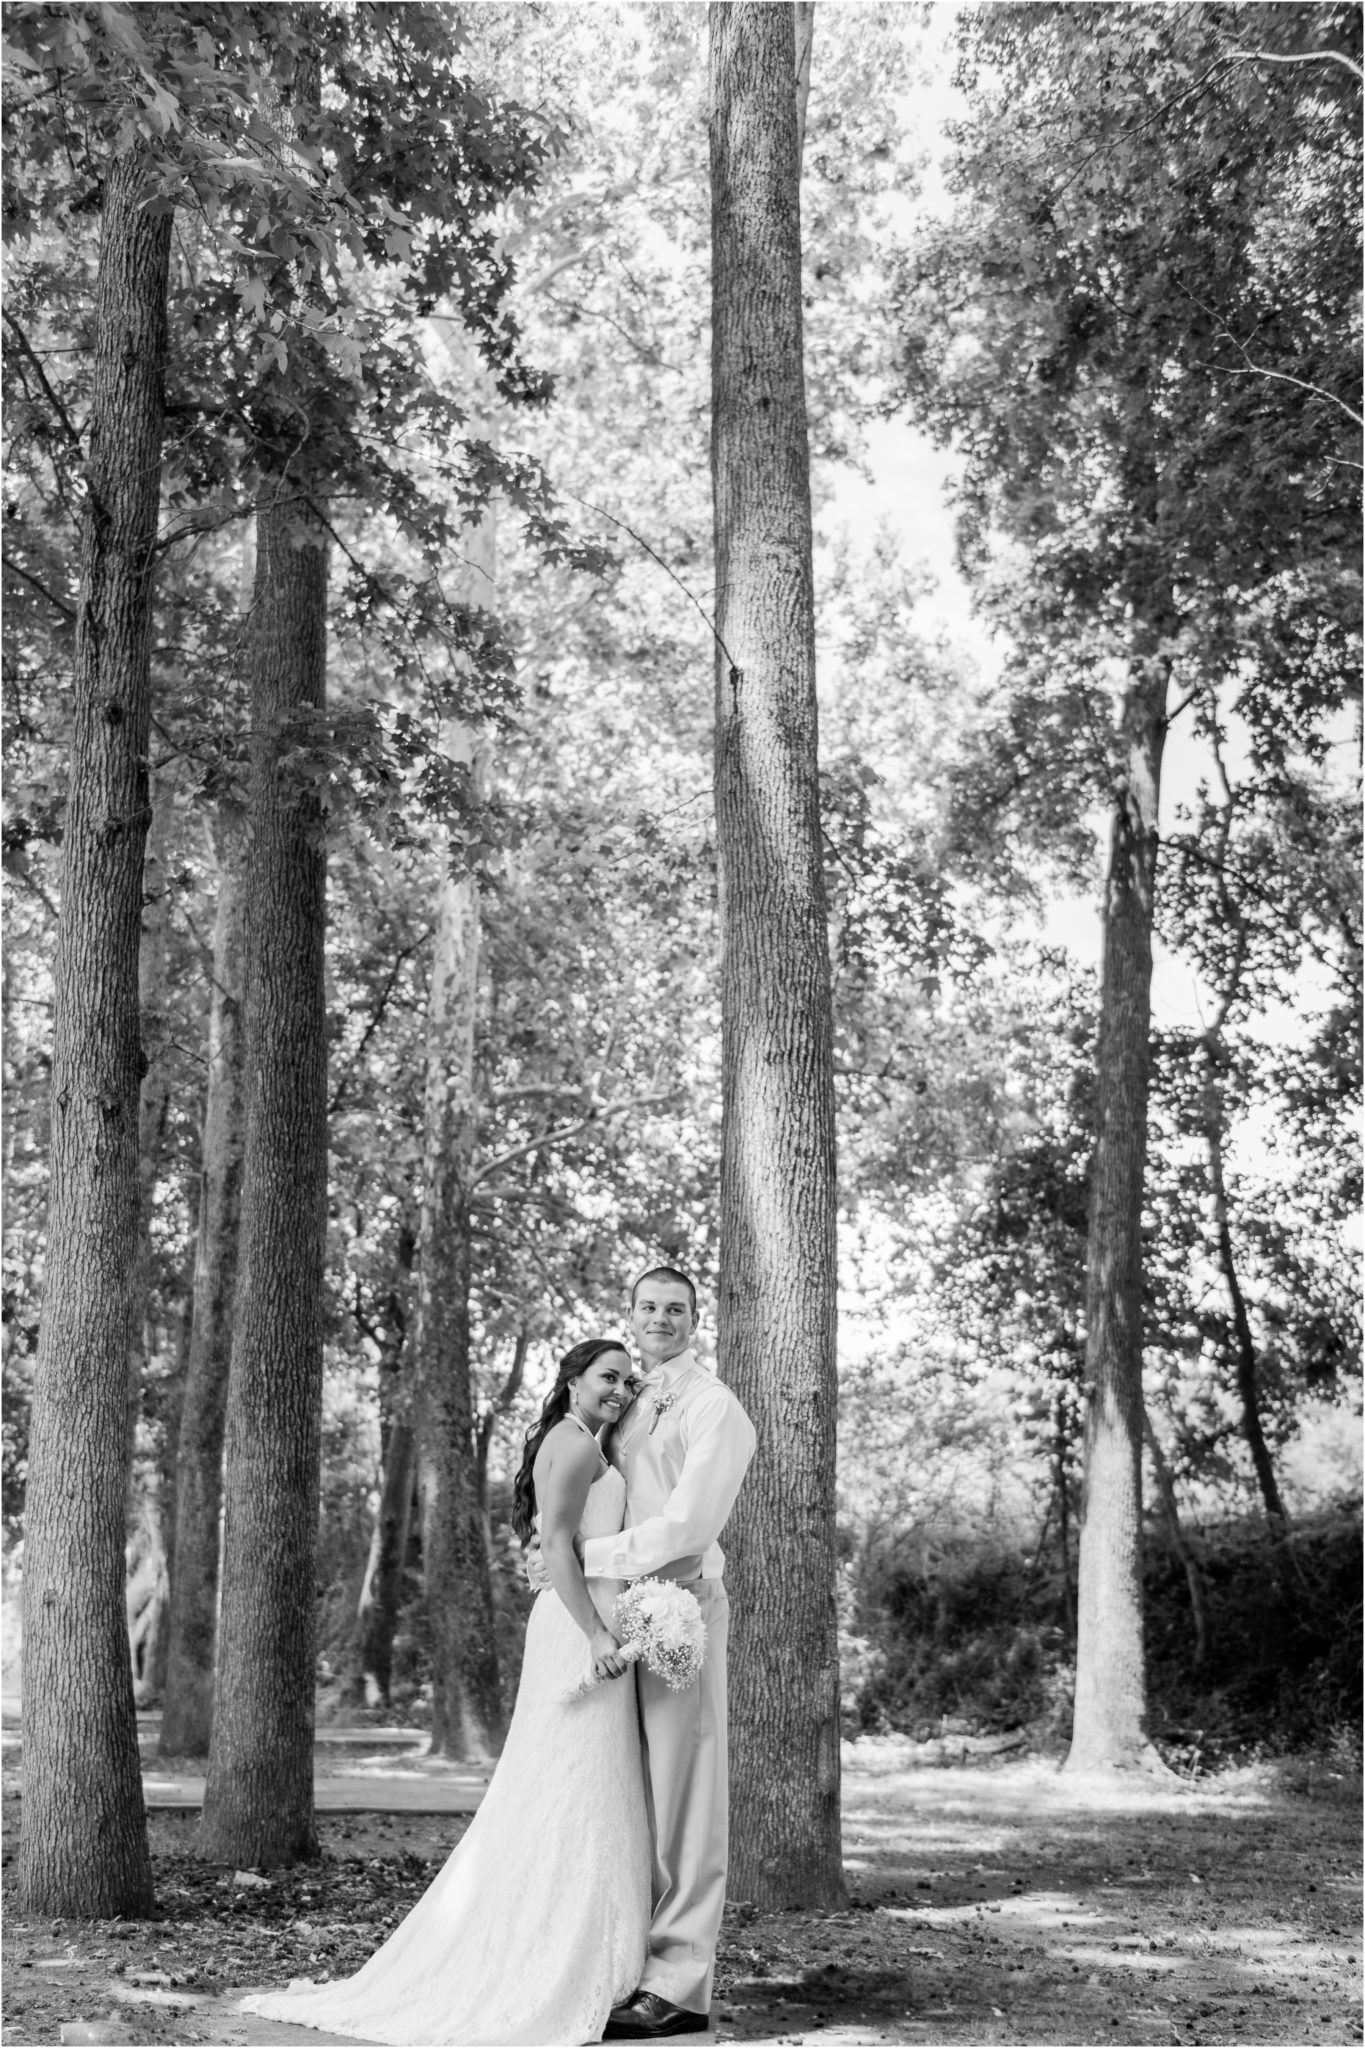 Black and white bride and groom photo in the woods.